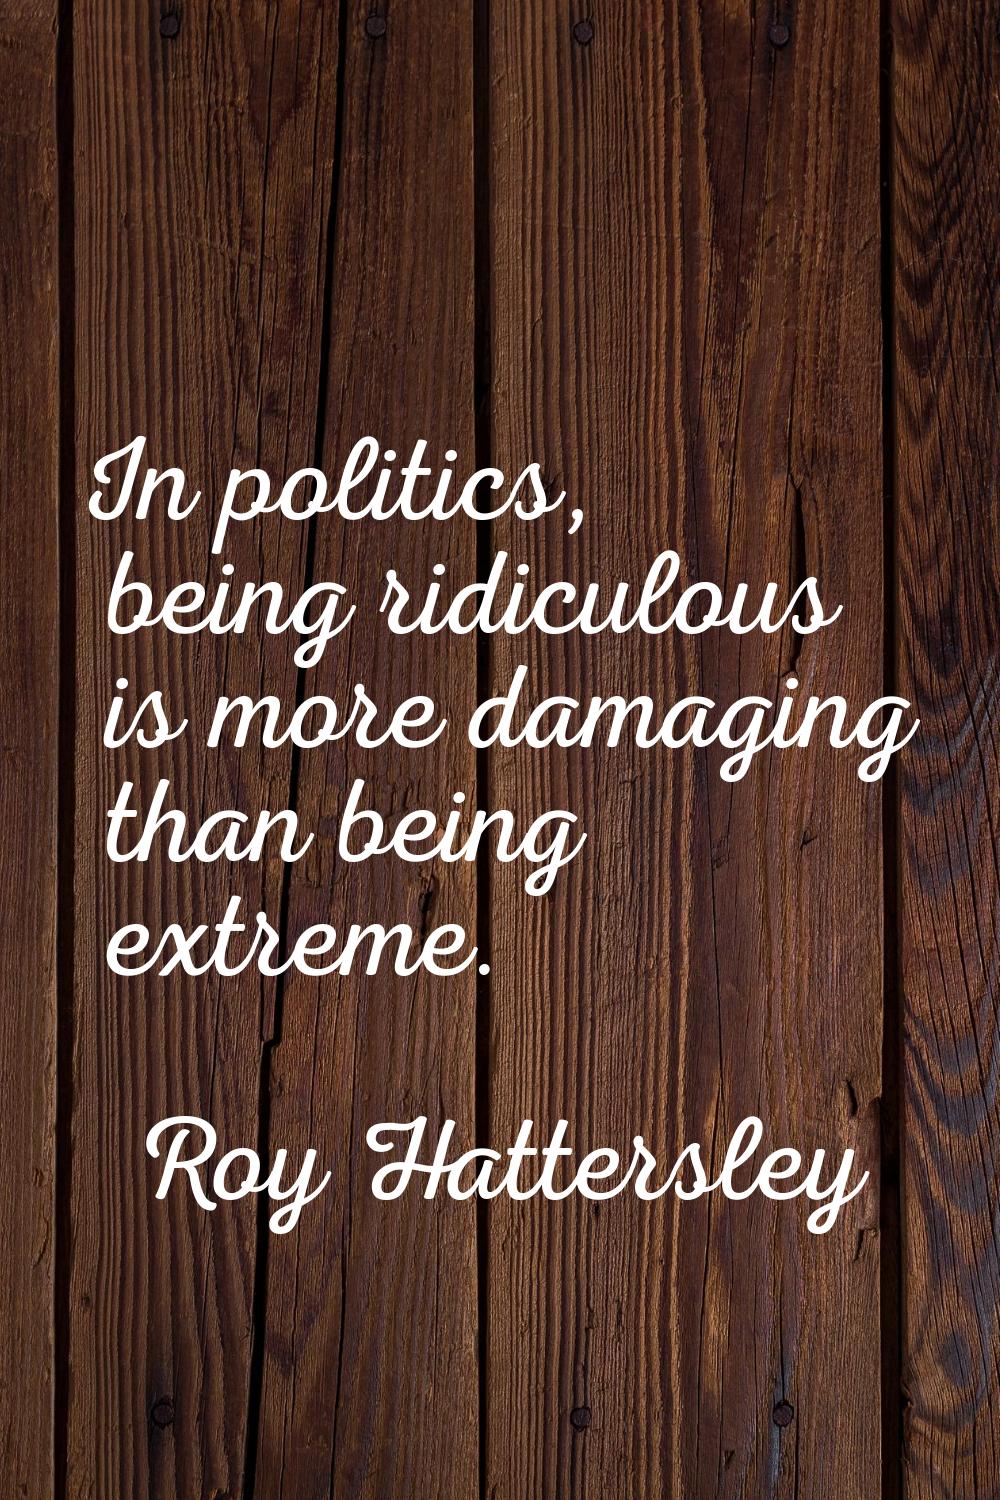 In politics, being ridiculous is more damaging than being extreme.